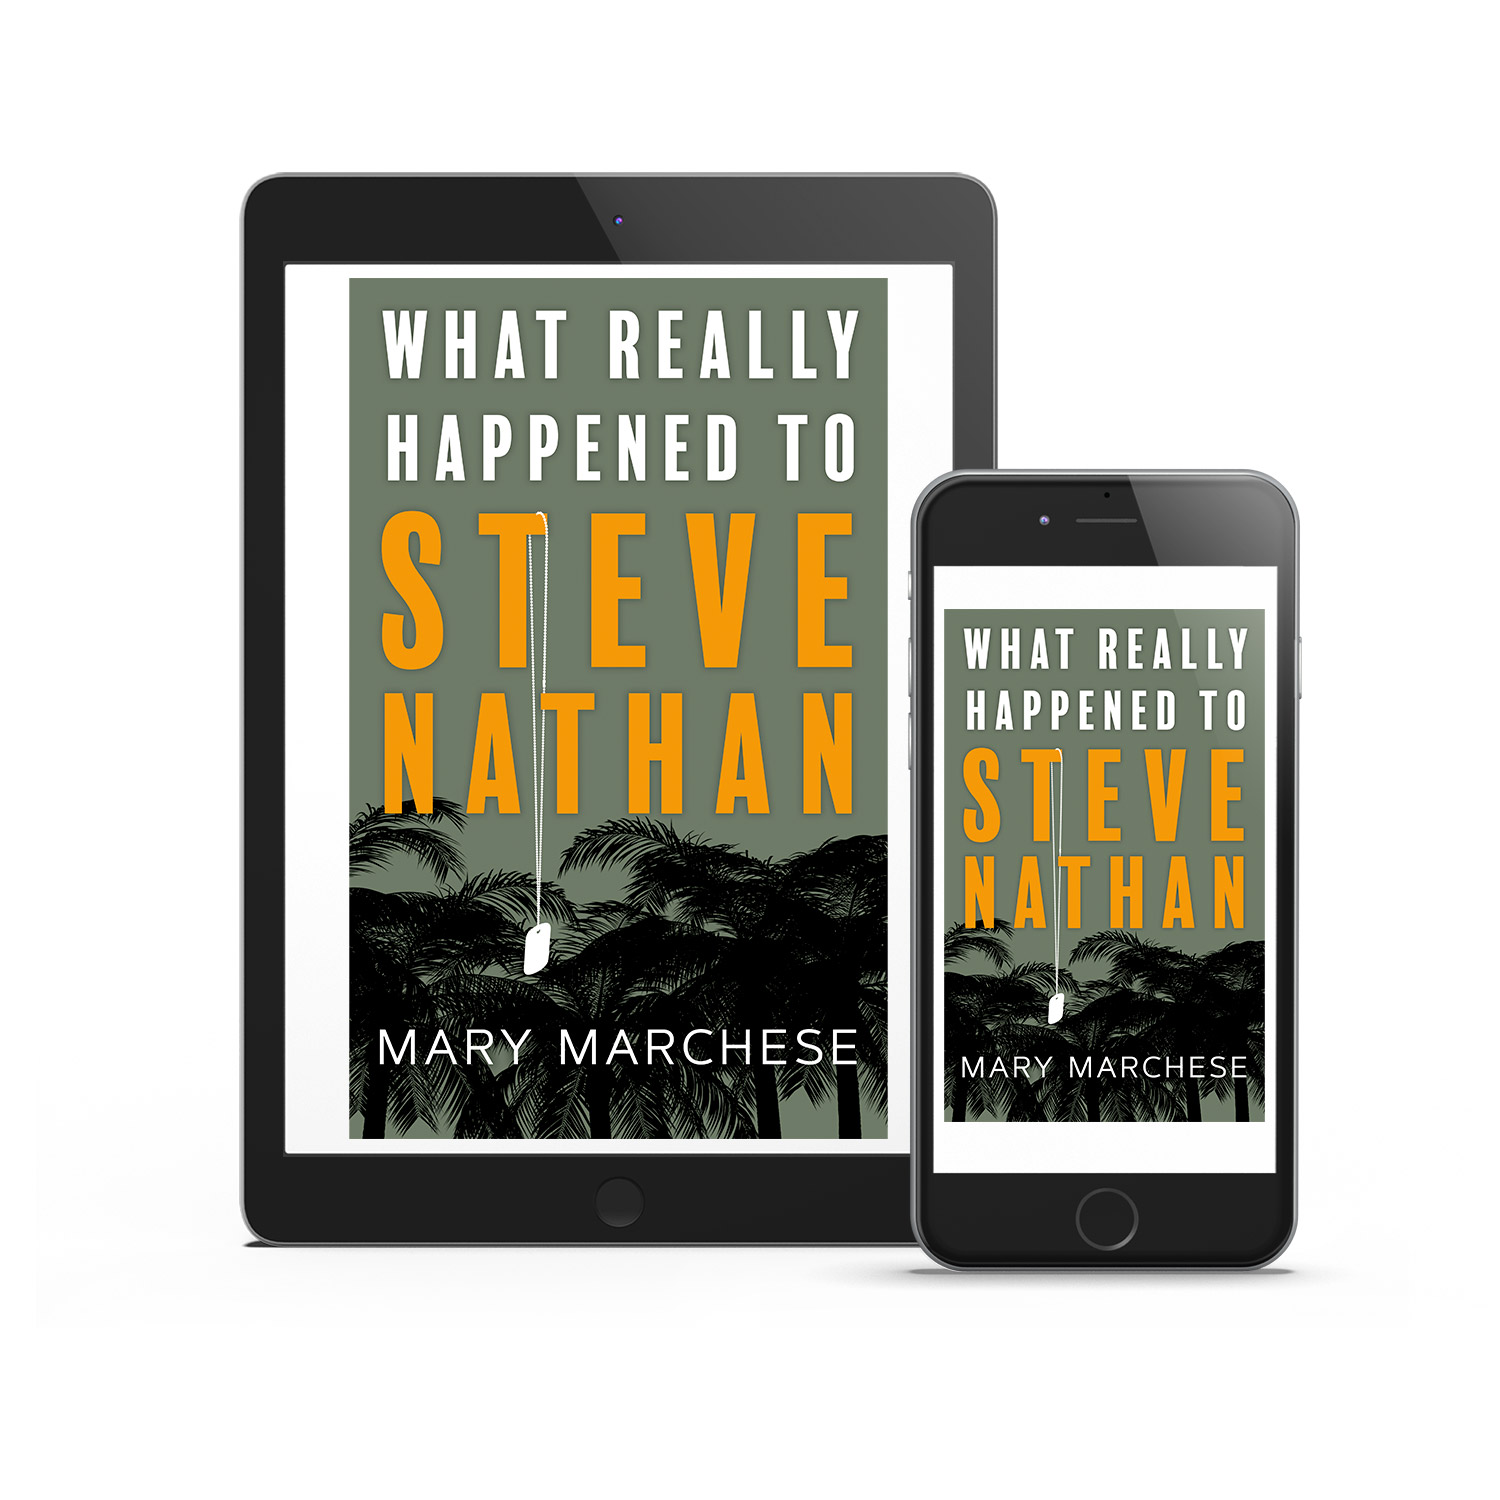 'What Really Happened To Steve Nathan' is a telling family mystery, set against the backdrop of the Vietnam War, by Mary Marchese. The book cover and interior were designed by Mark Thomas, of coverness.com. To find out more about my book design services, please visit www.coverness.com.